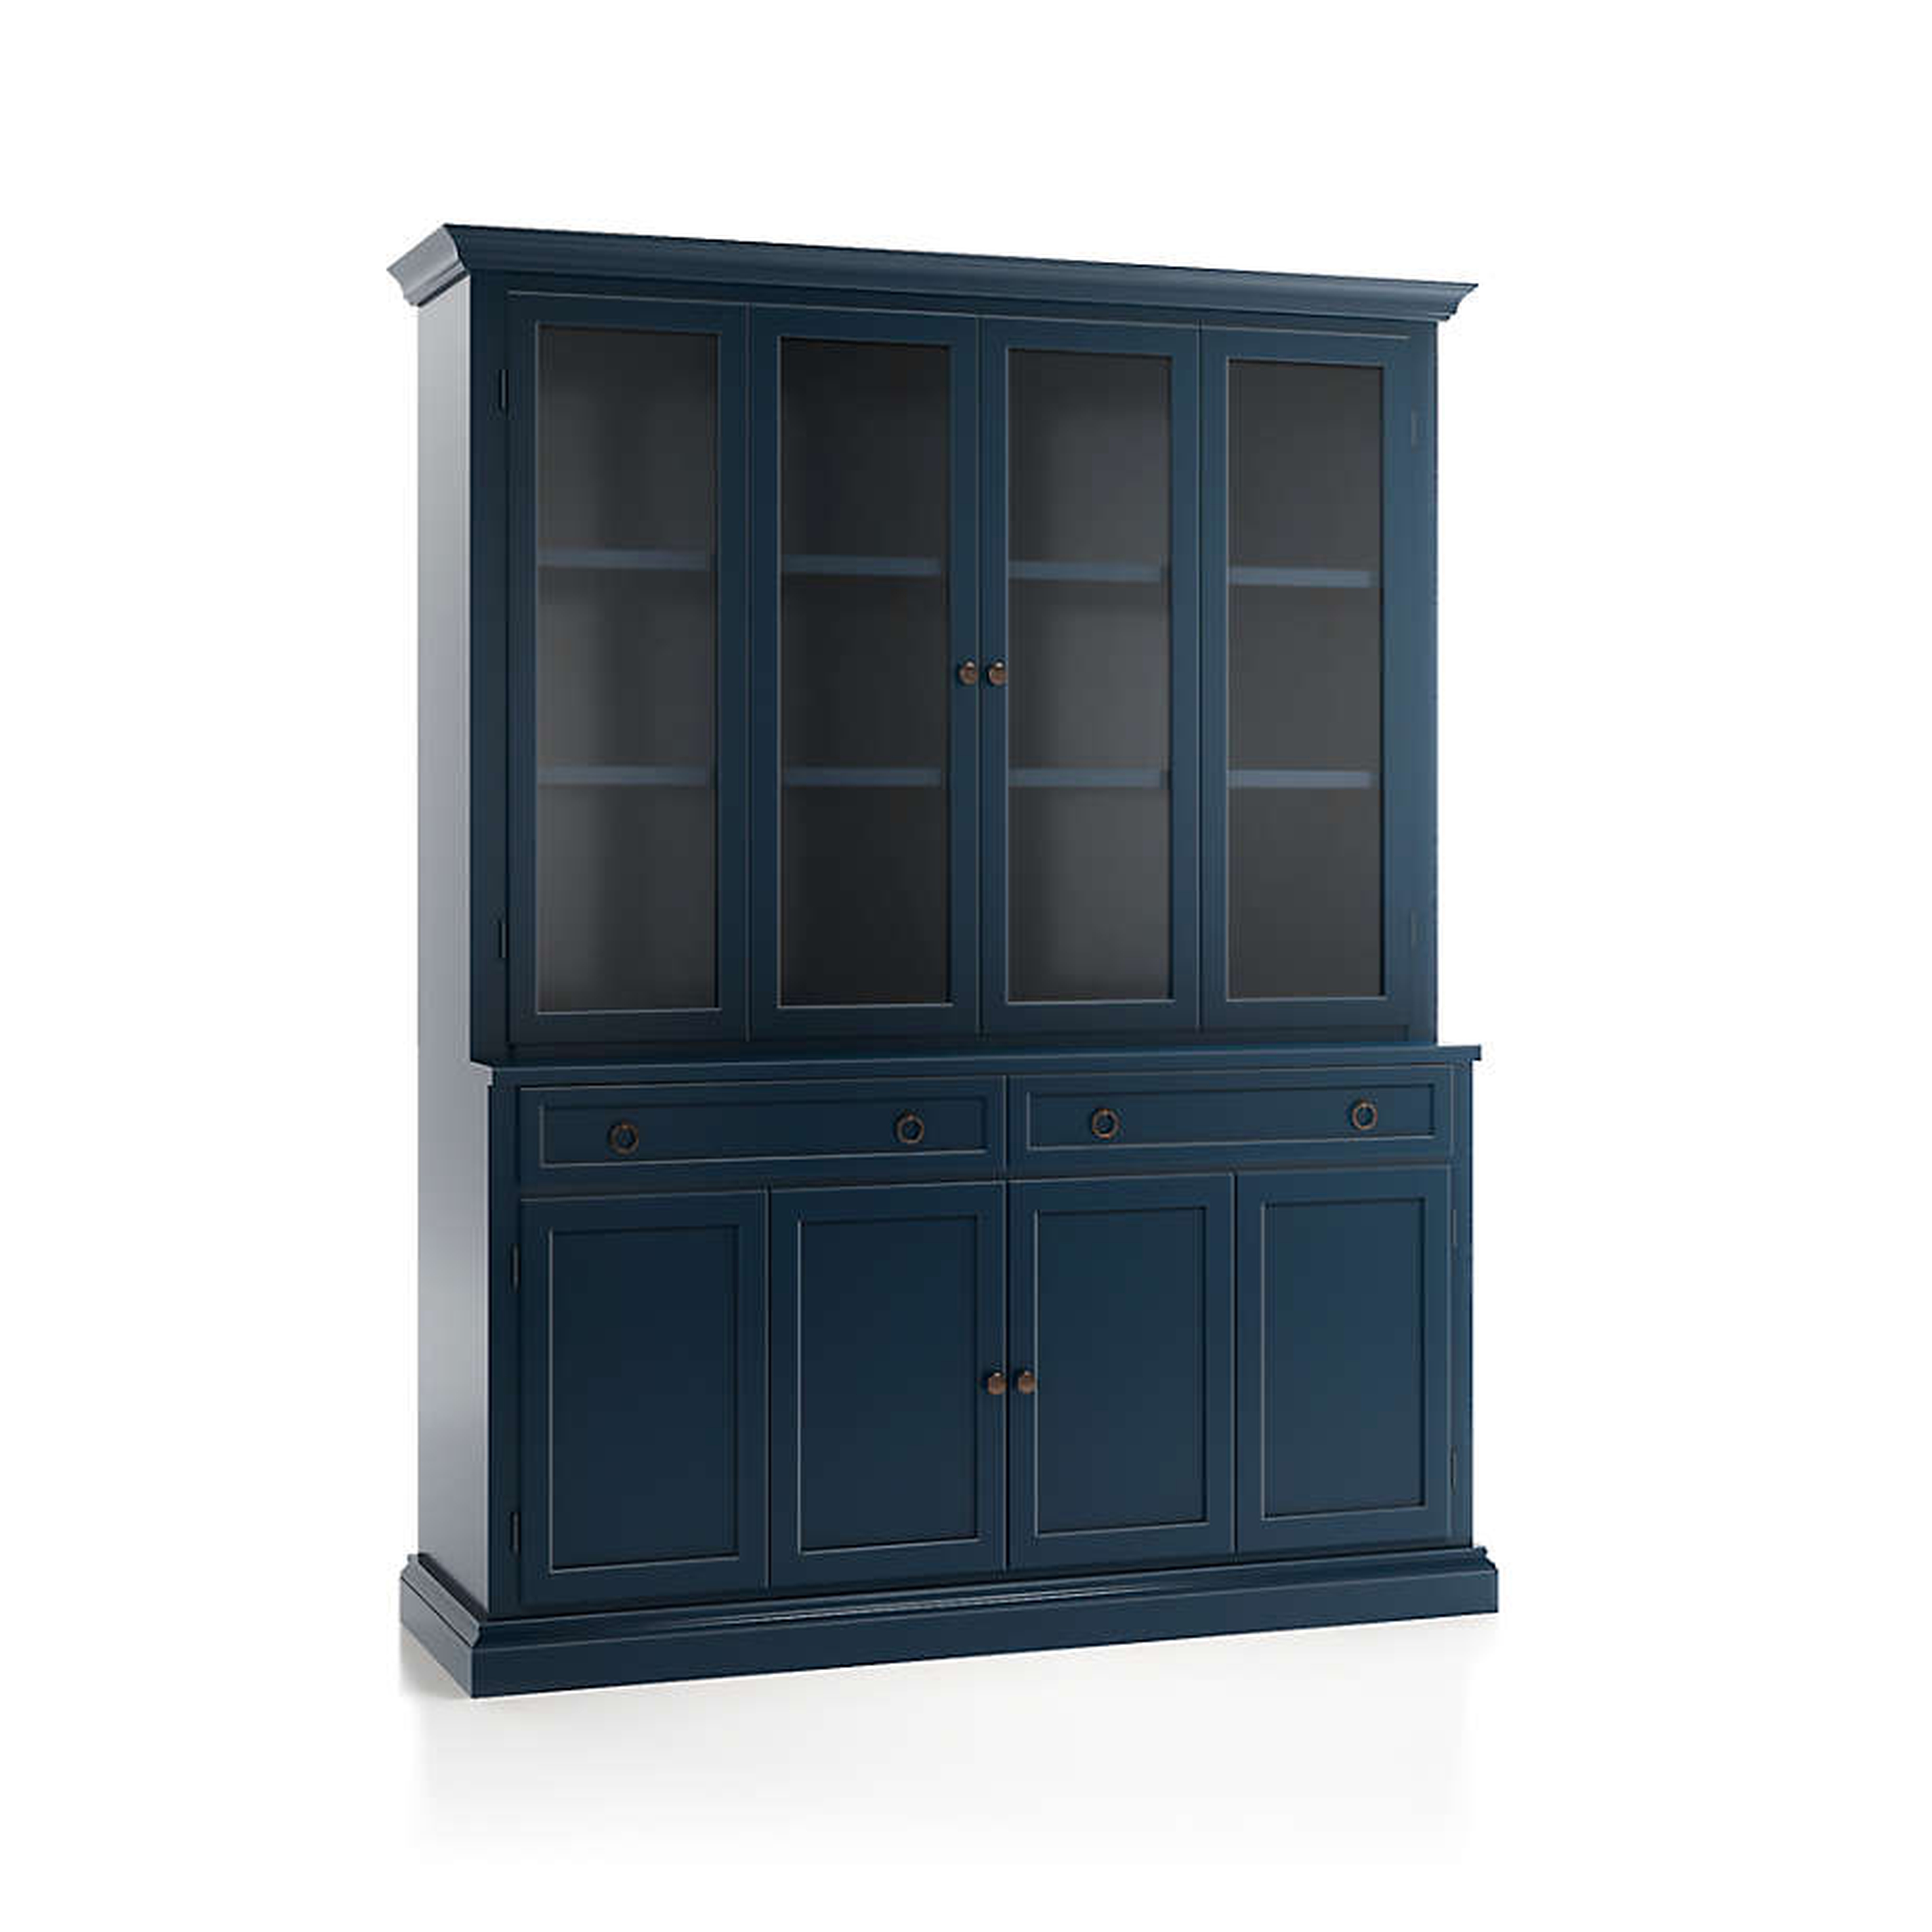 Cameo Indigo 2-Piece Entertainment Center with Wood and Glass Doors - Crate and Barrel